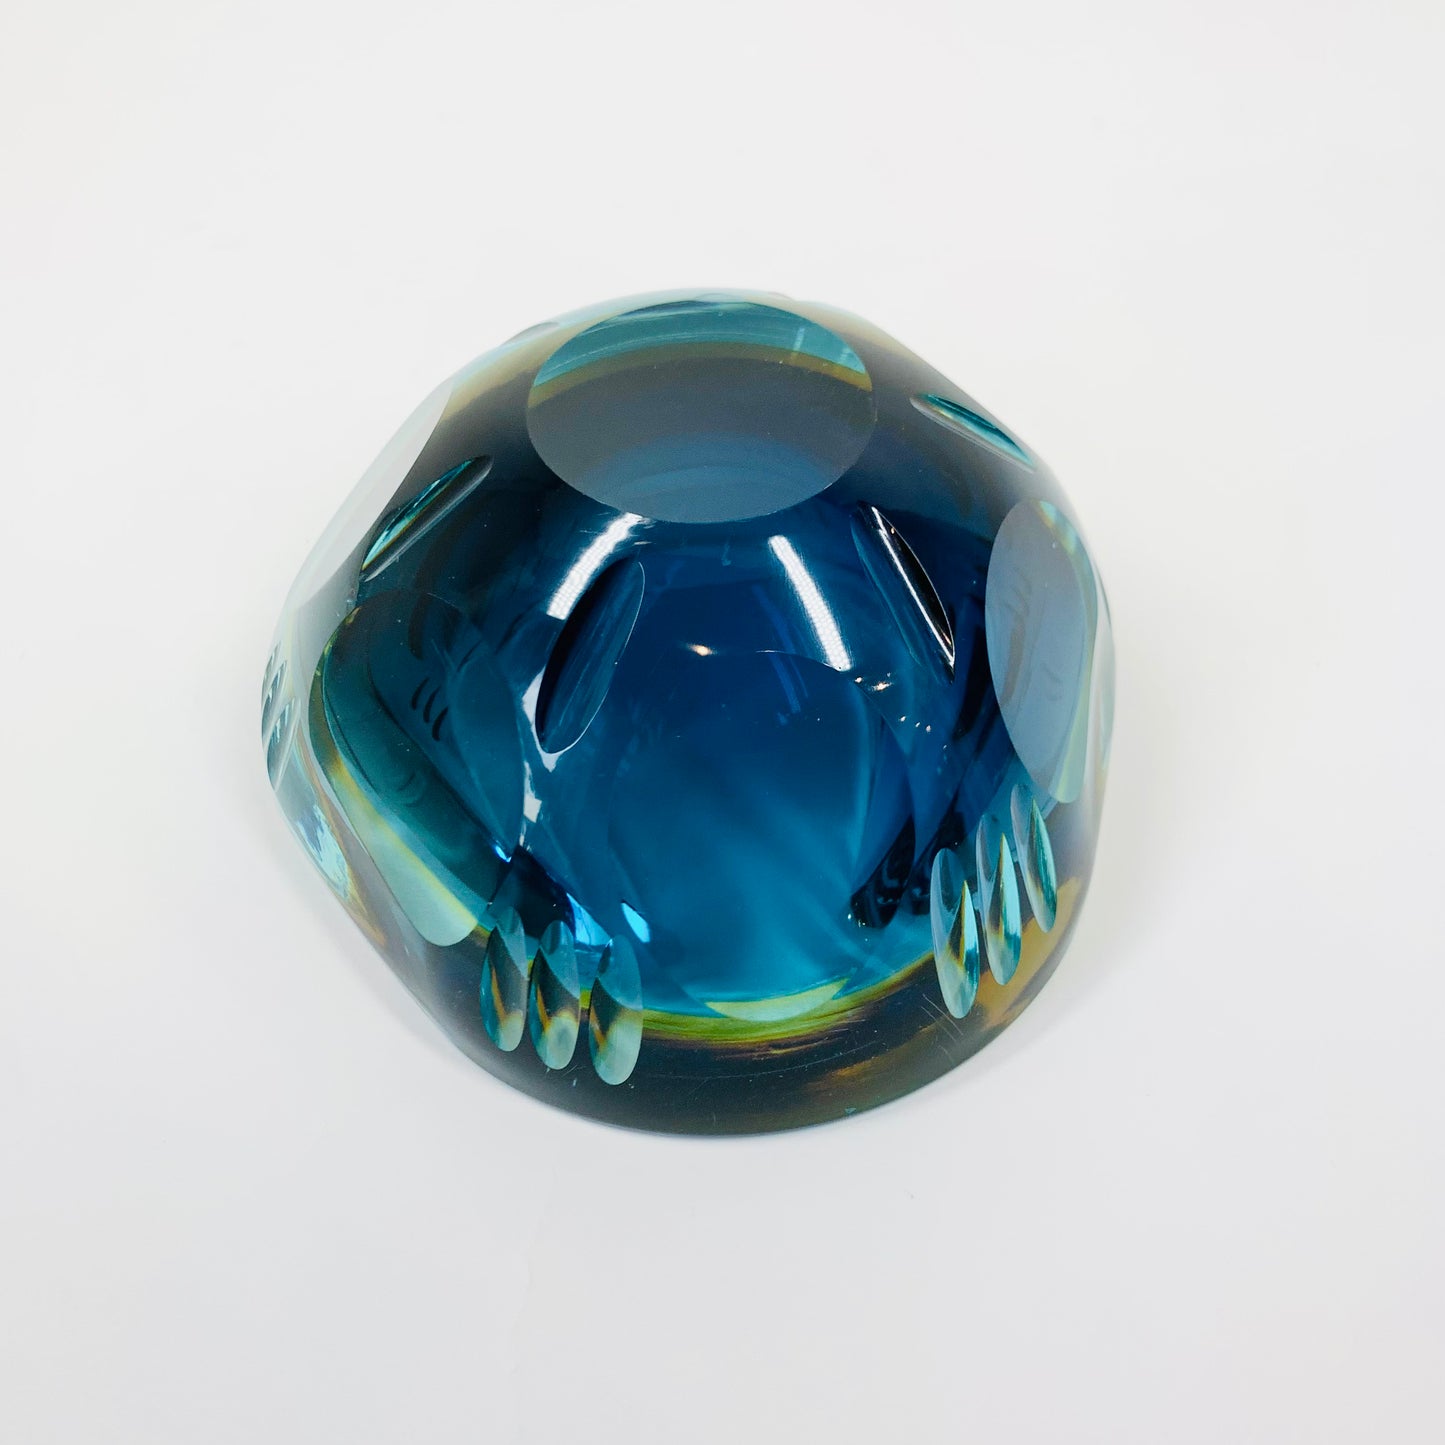 Extremely rare MCM blue green faceted Murano glass geode bowl by Mandruzatto